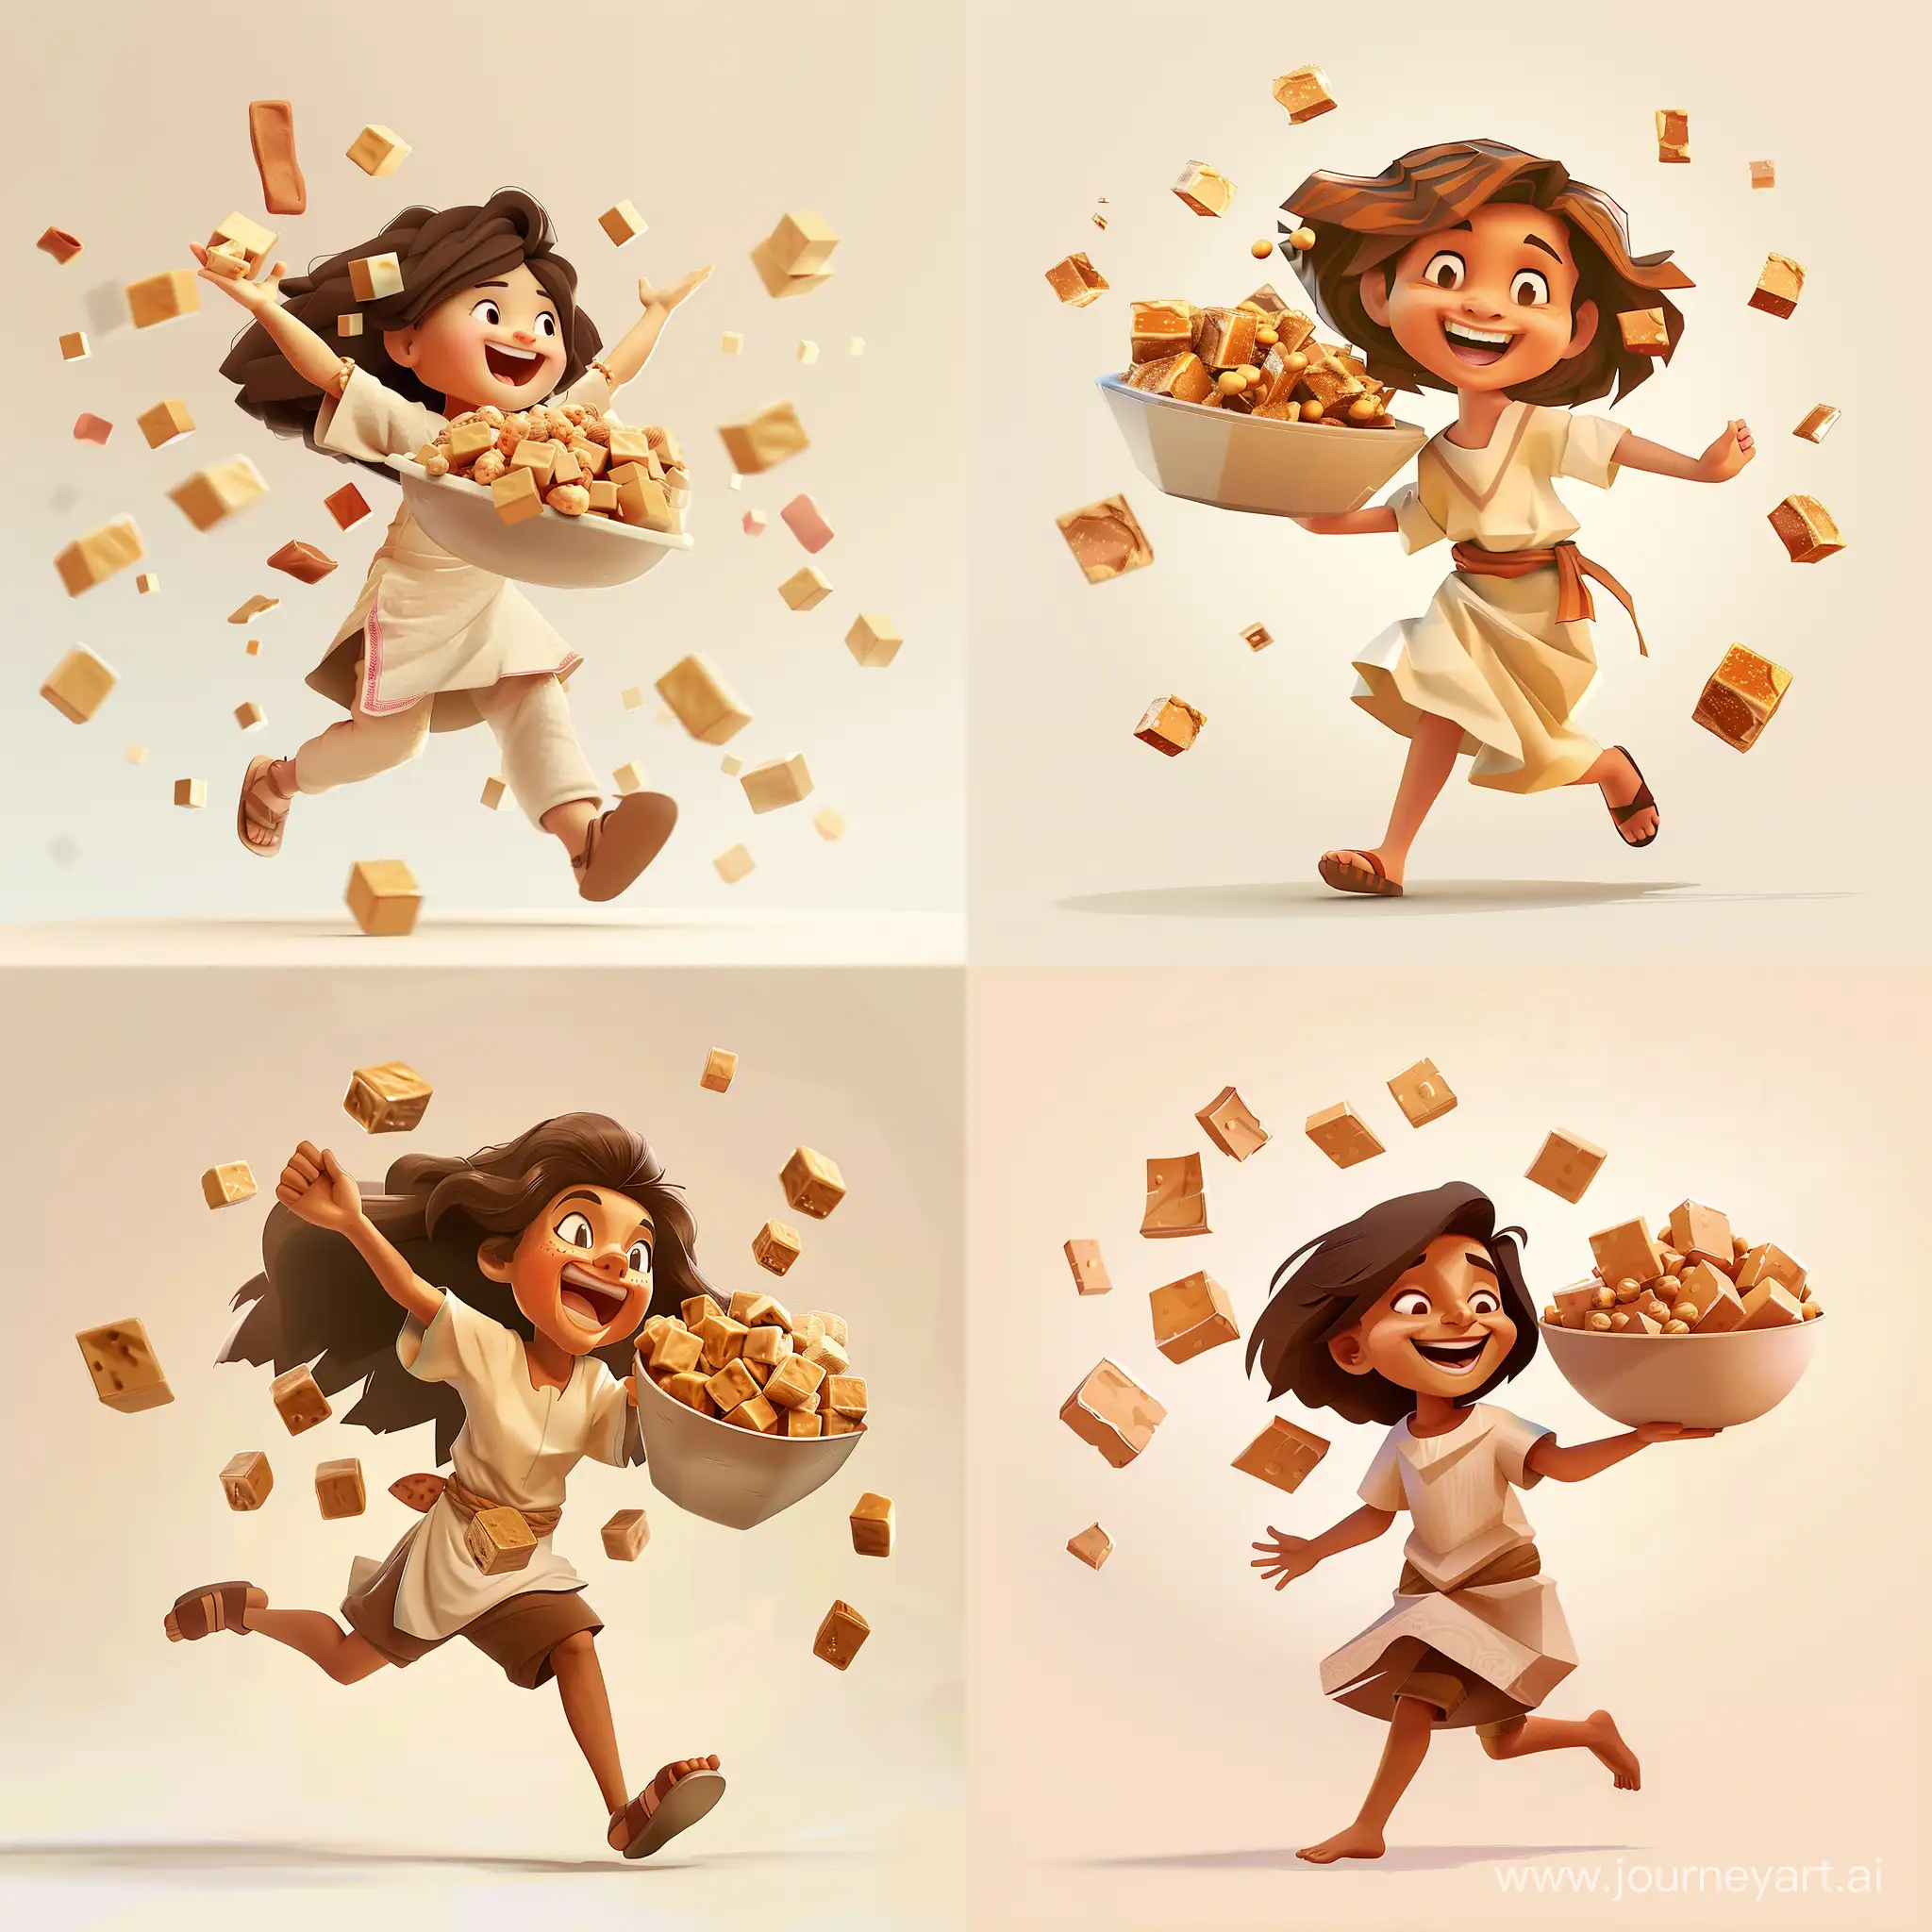 A Yemeni girl is carrying a bowl of toffee candy with nuts. She is very happy and runs away with the bowl. The background is a light color, 3D style, the candy is rectangles.